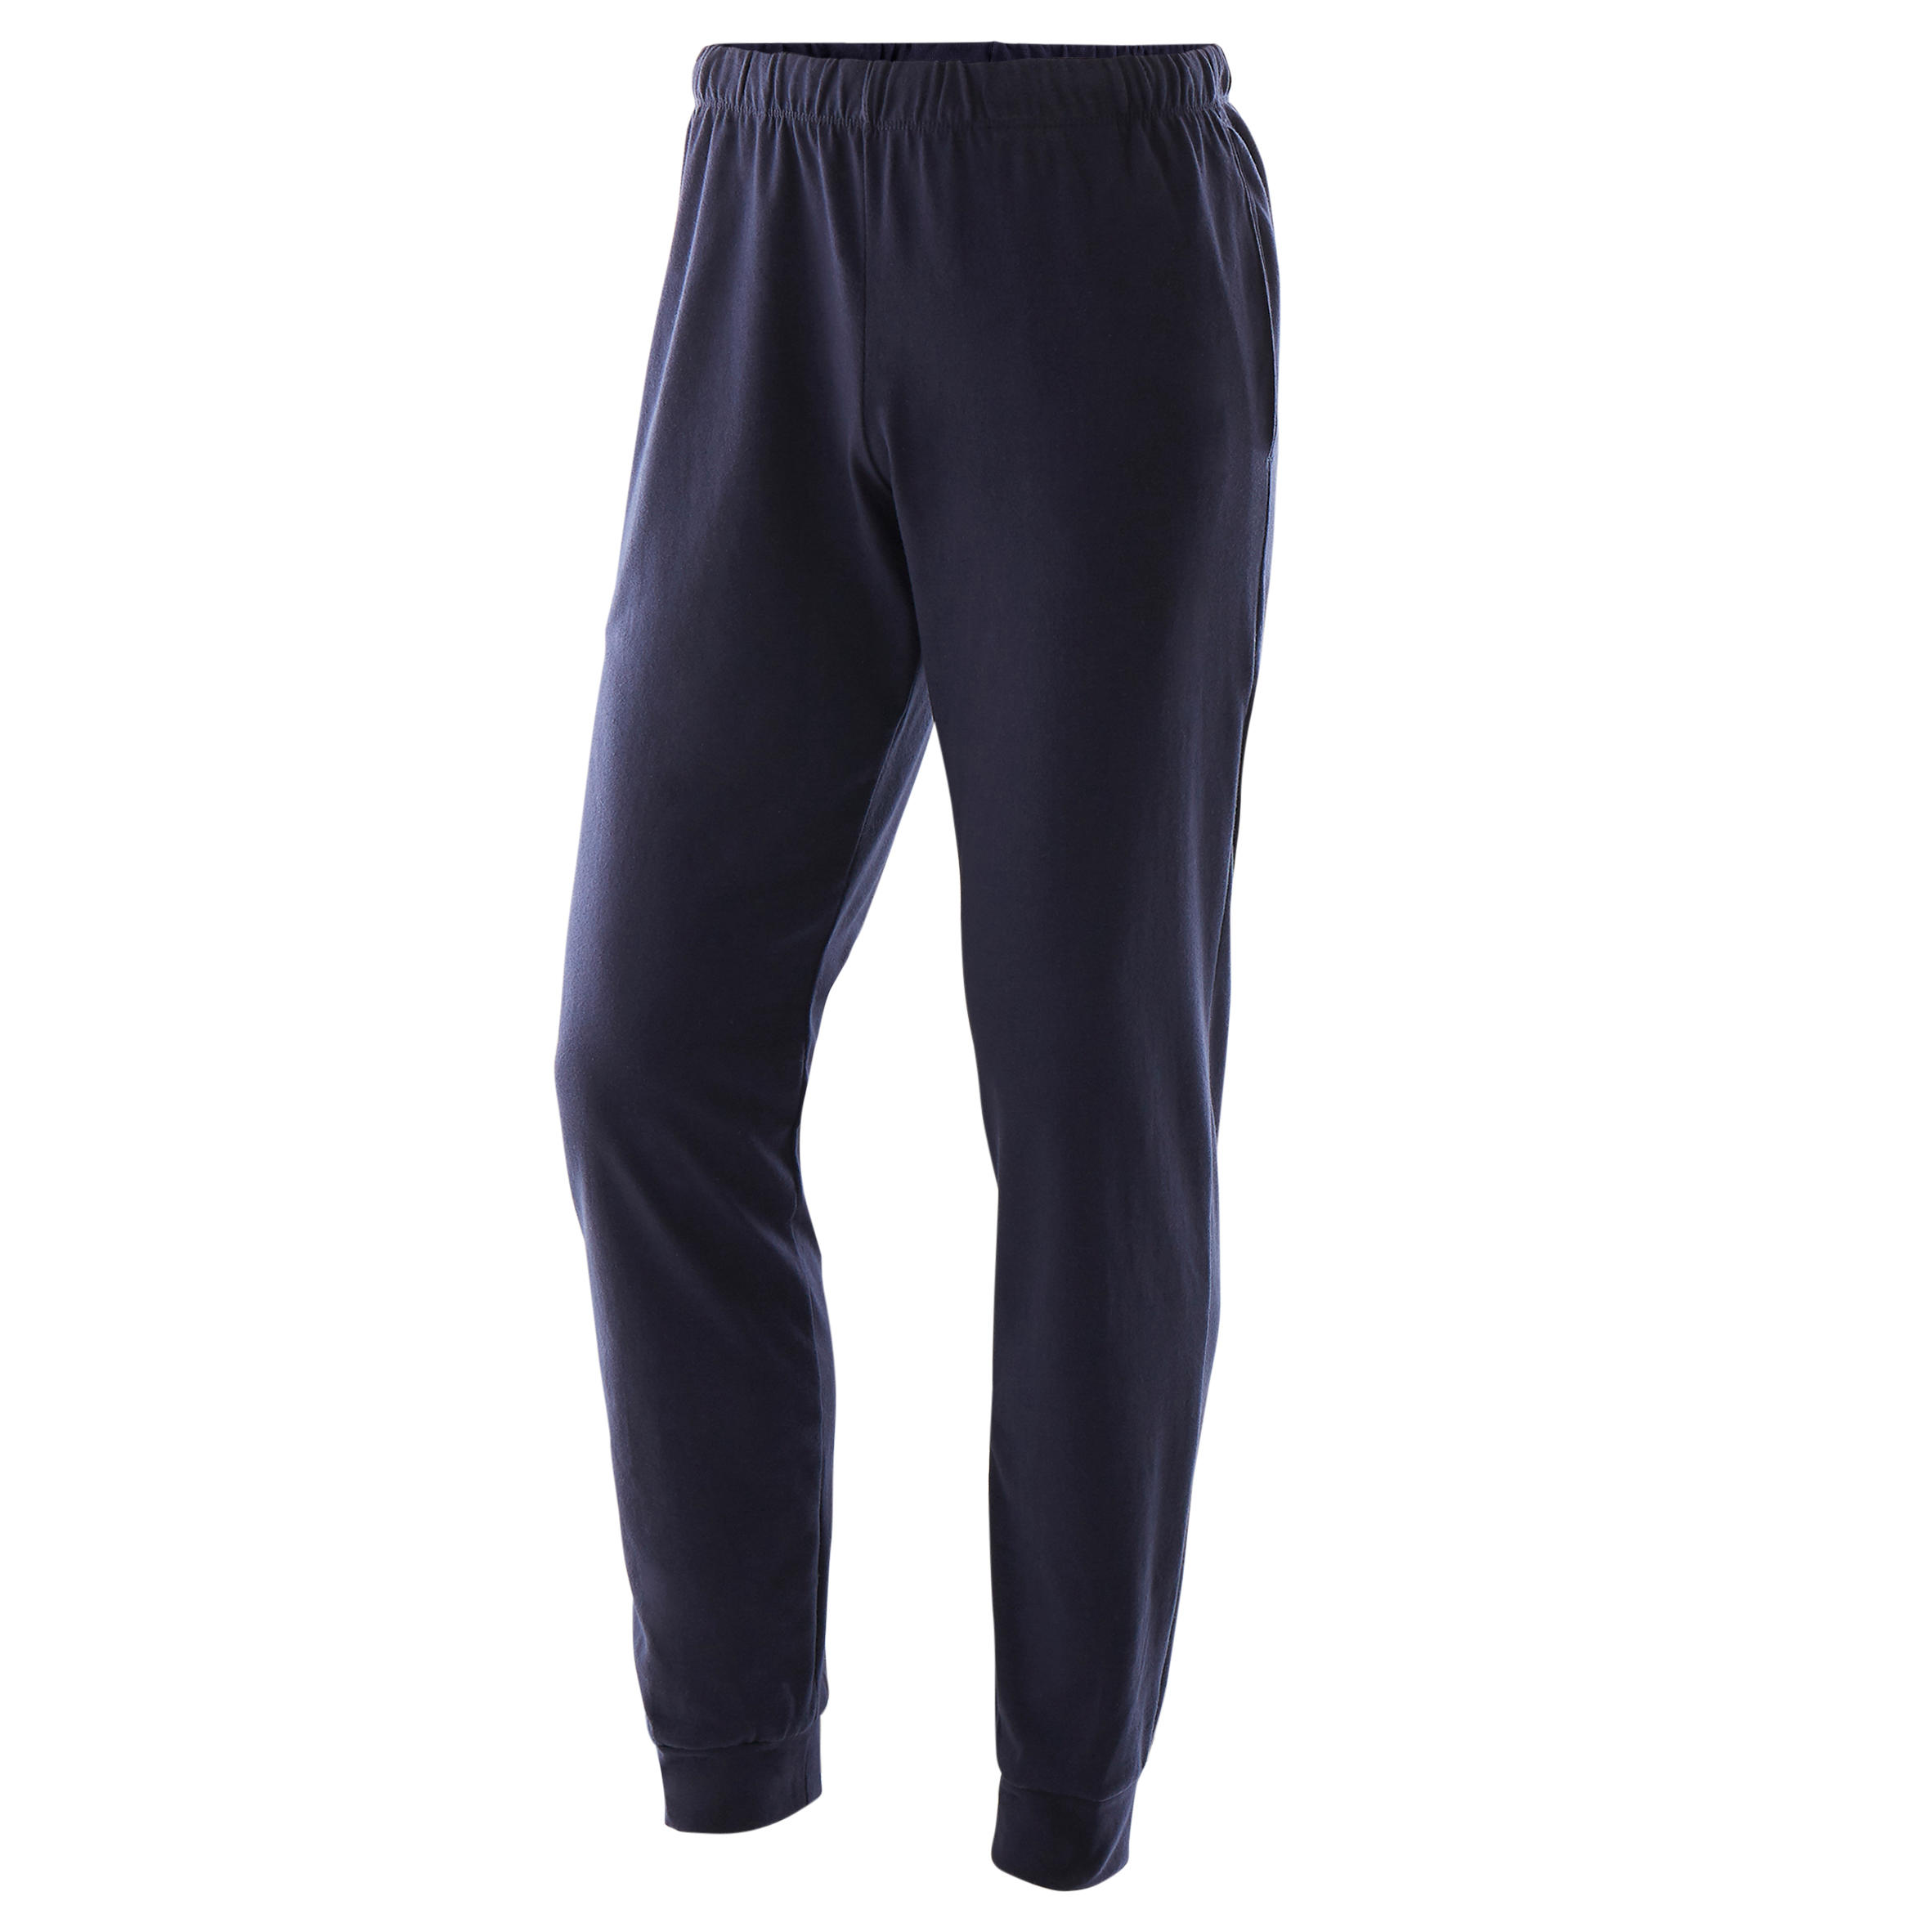 Top 92+ decathlon gym trousers super hot - in.cdgdbentre